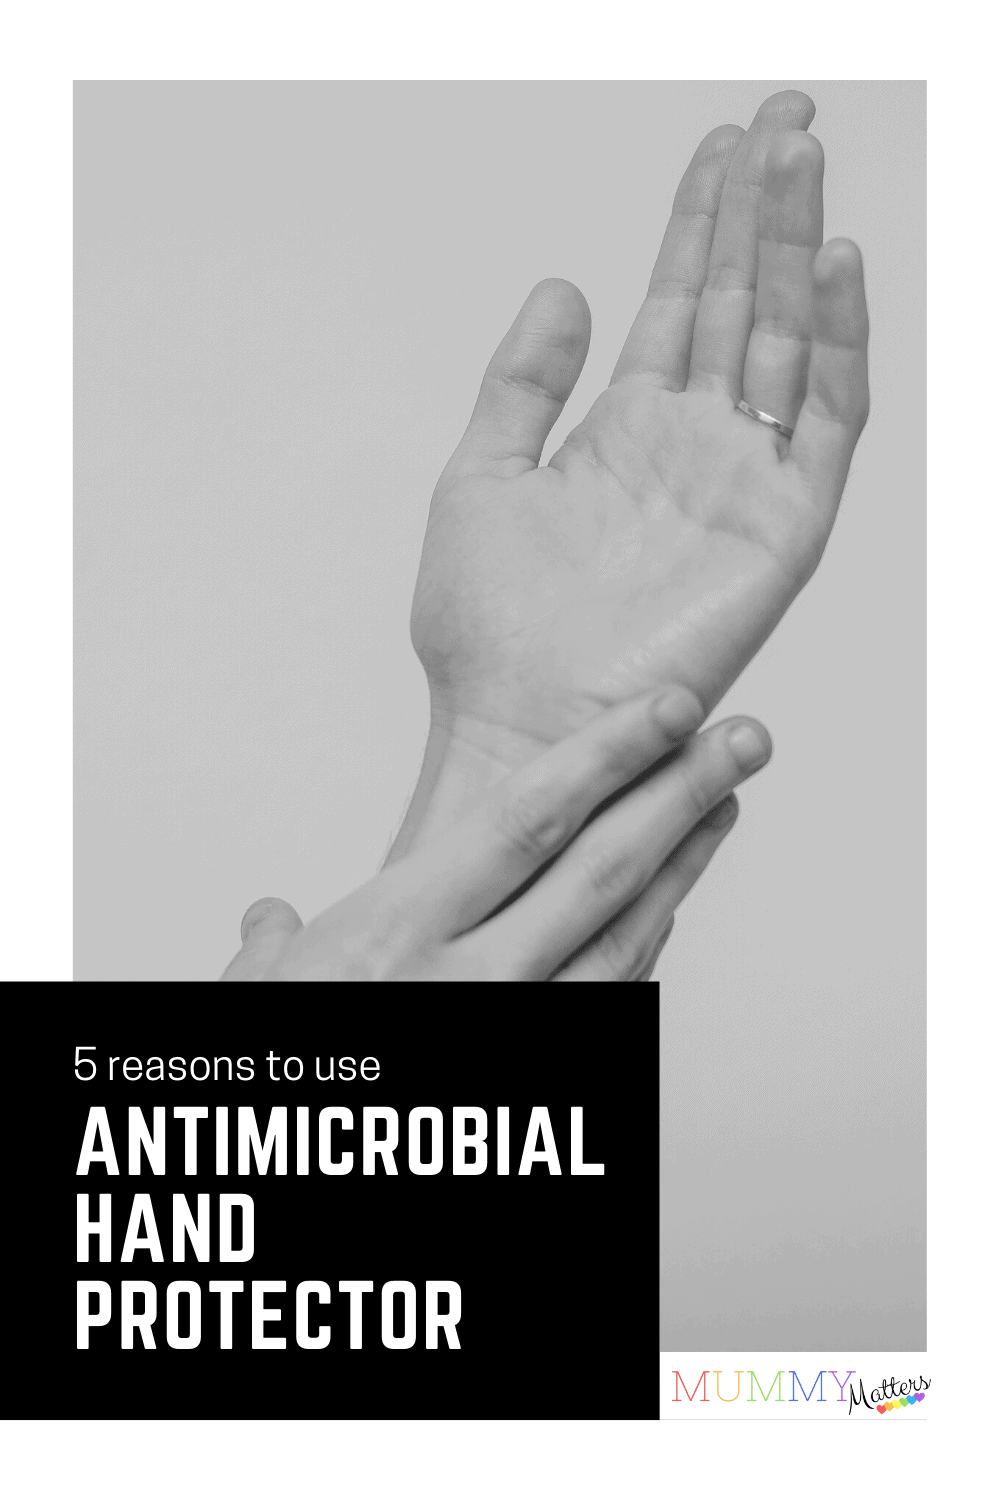 Here’s a brief on what an antimicrobial hand protector can do, and five reasons why you should consider getting one of your own.